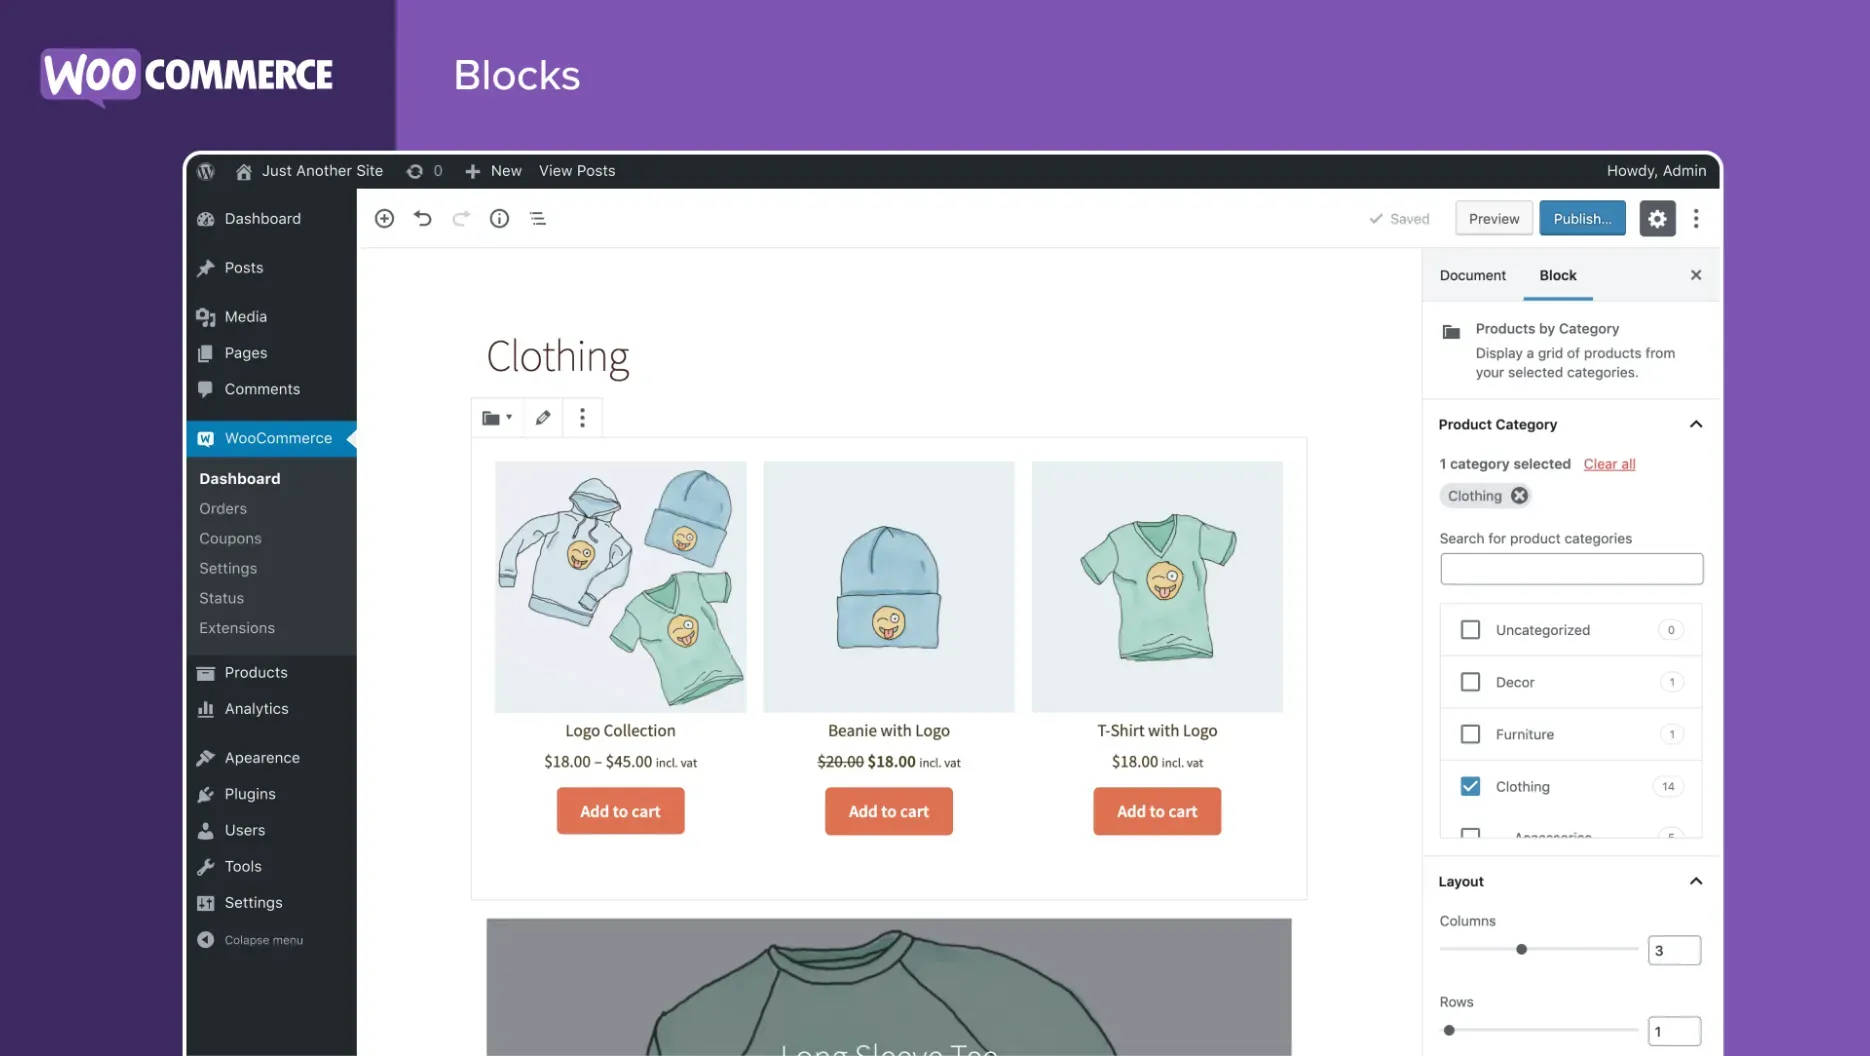 WooCommerce is a WordPress plugin that allows you to sell your products online